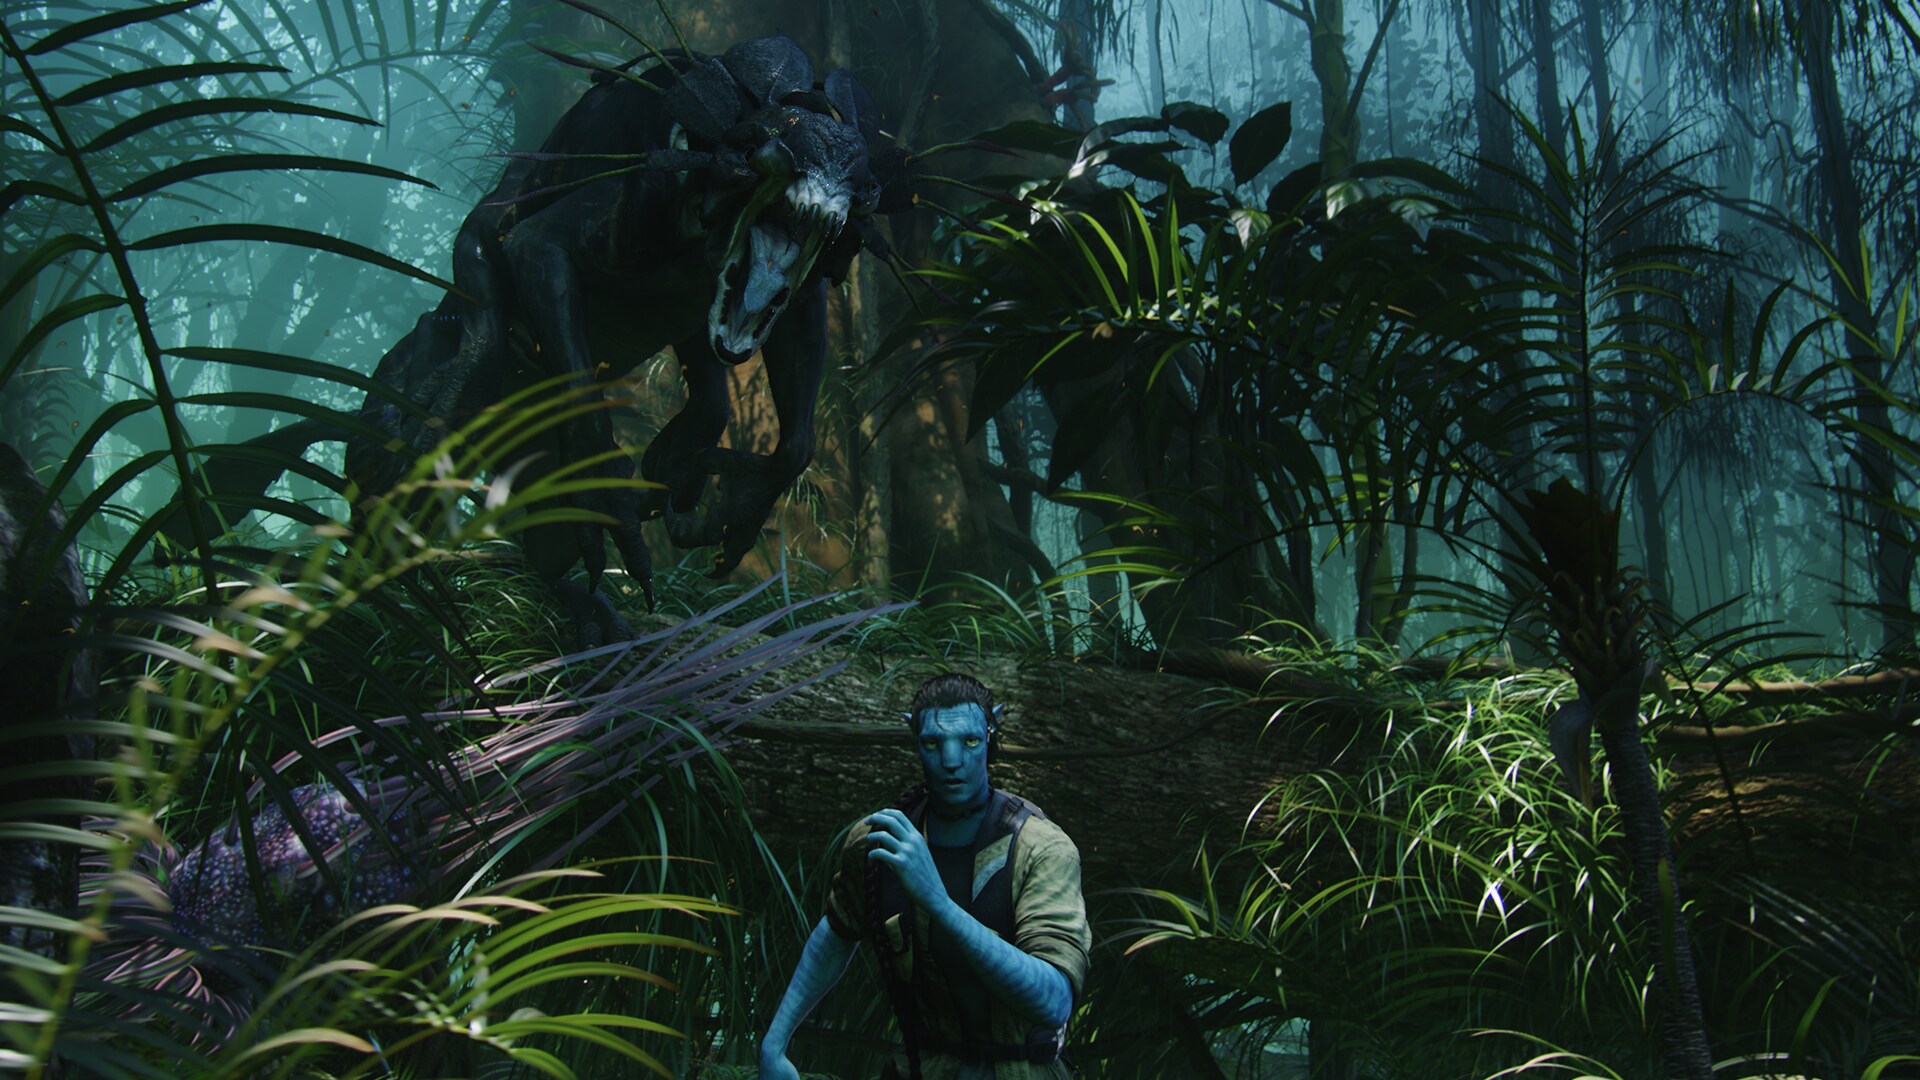 A Palulukan (creature native to Pandora) is pictured in the air, about to pounce on an unaware Na'vi man.